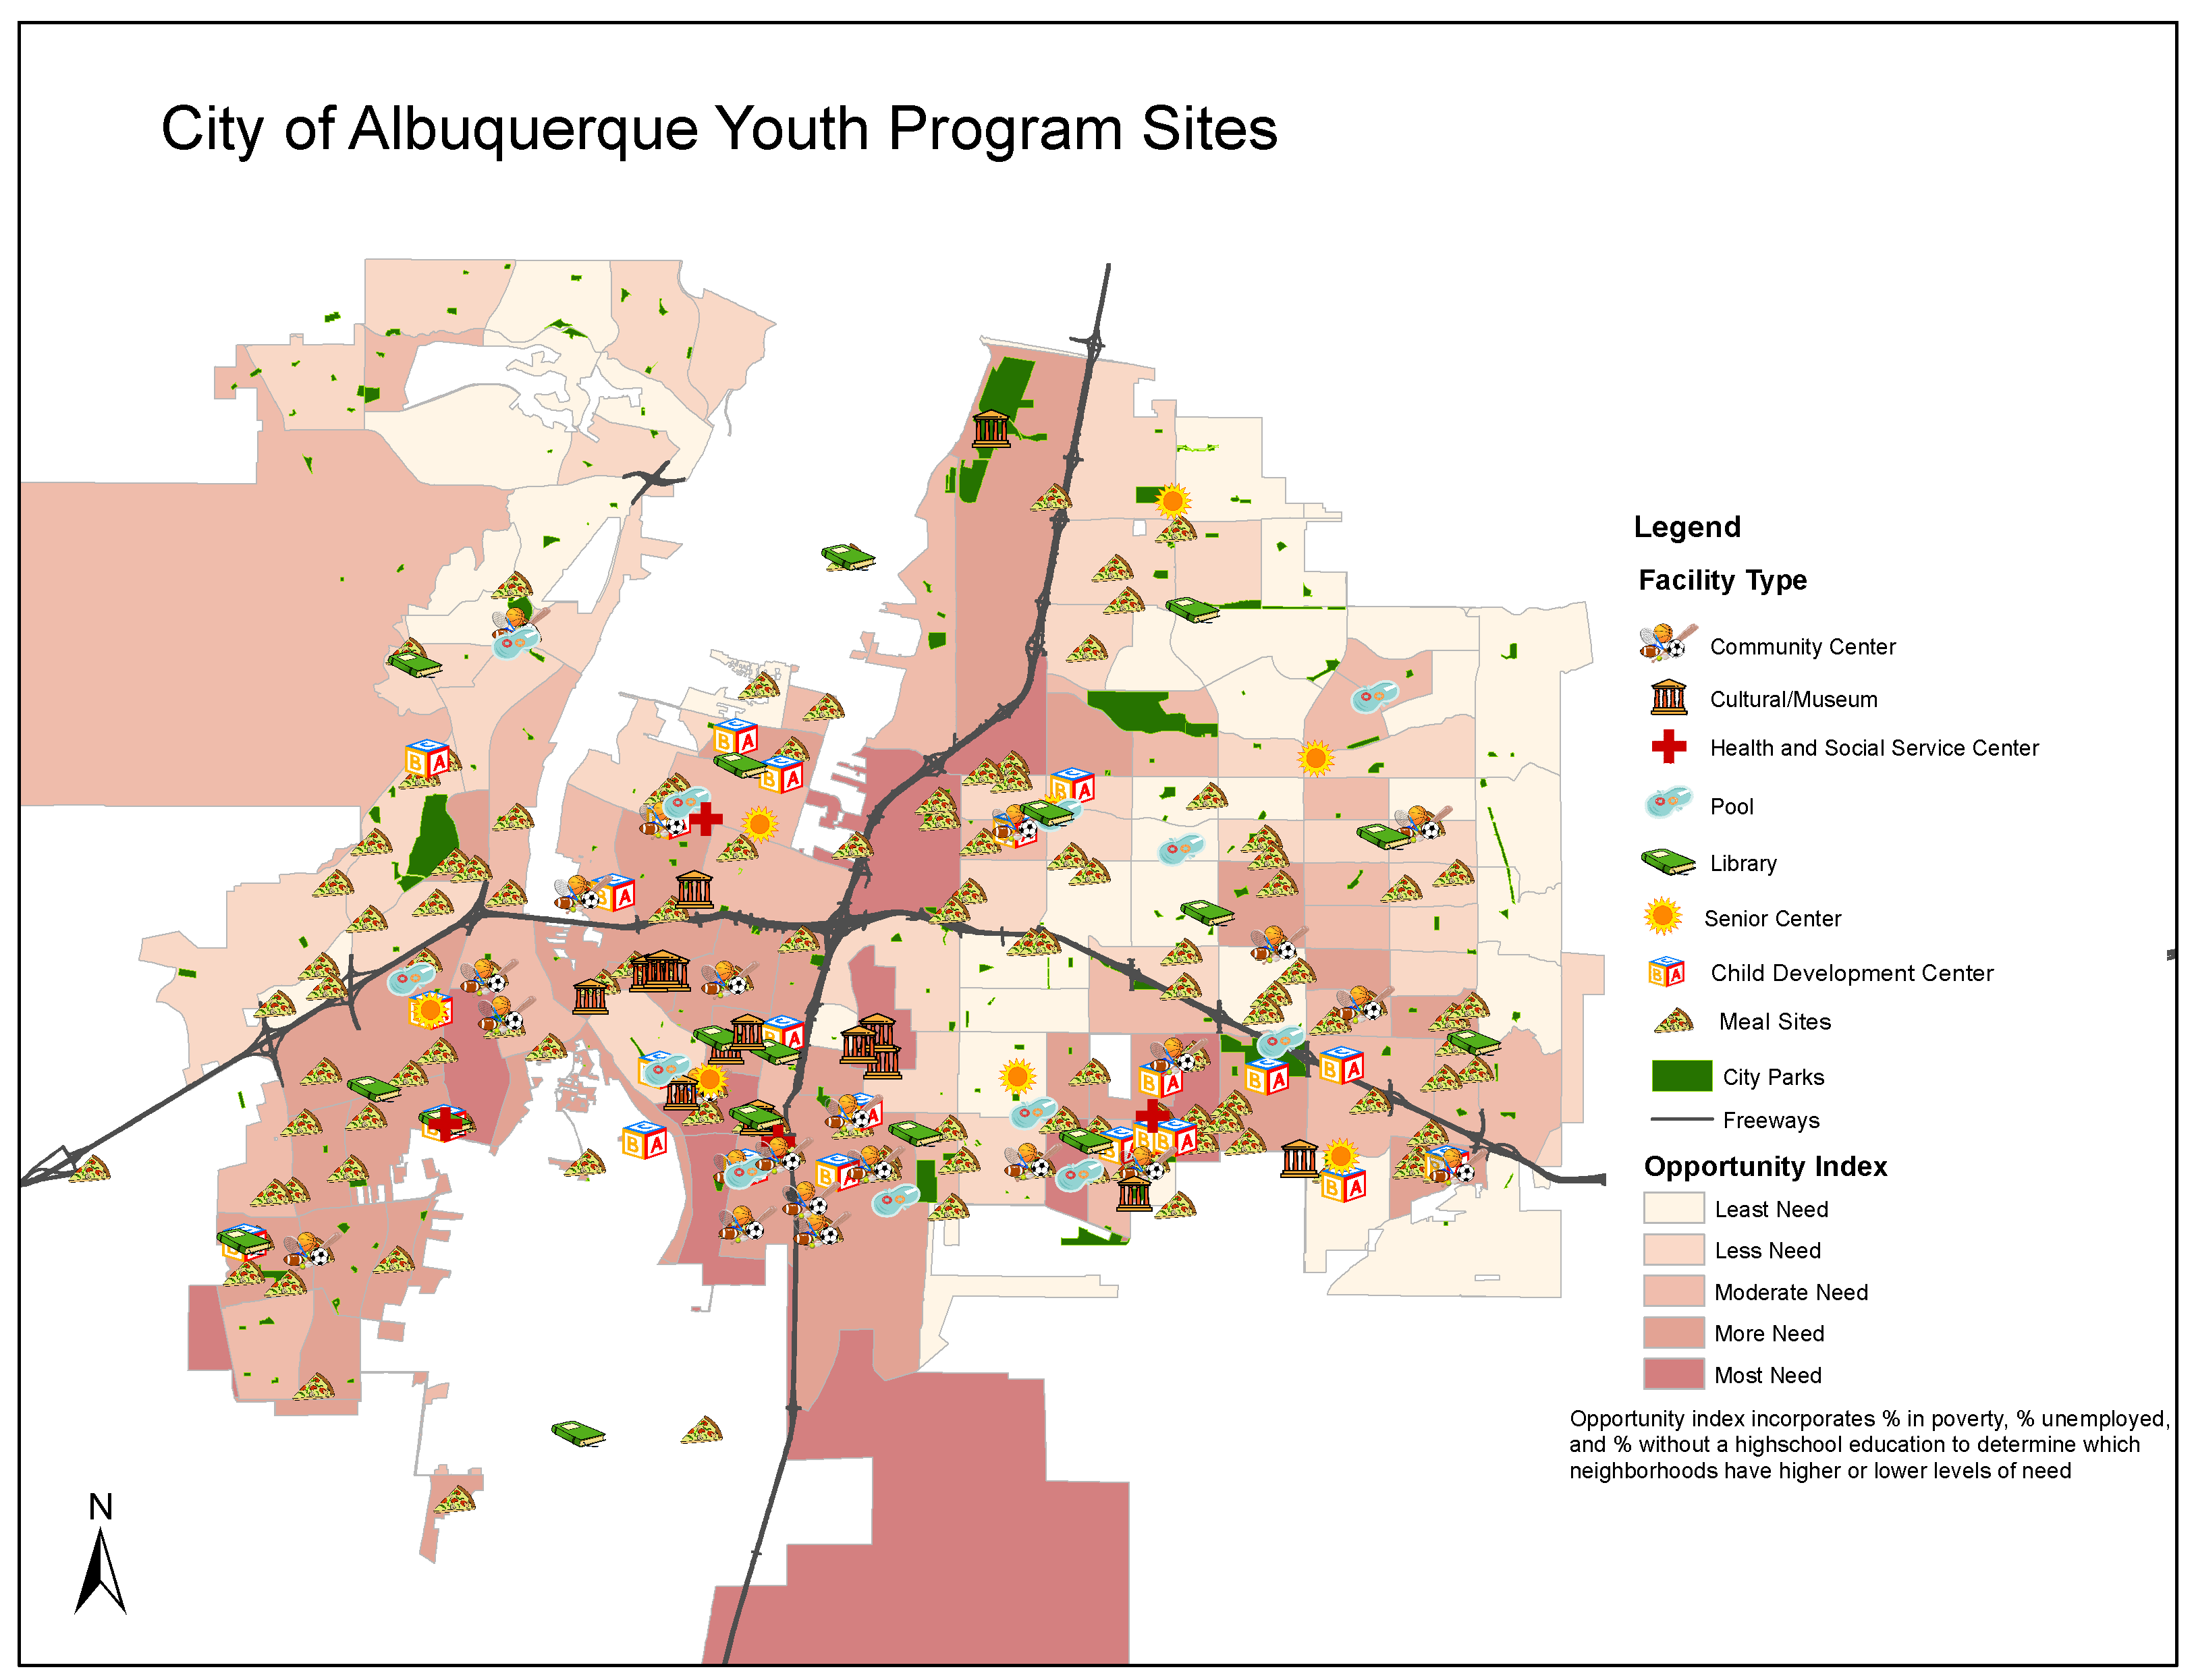 Photo: One ABQ Kids Cabinet City of Albuquerque Youth Program Sites